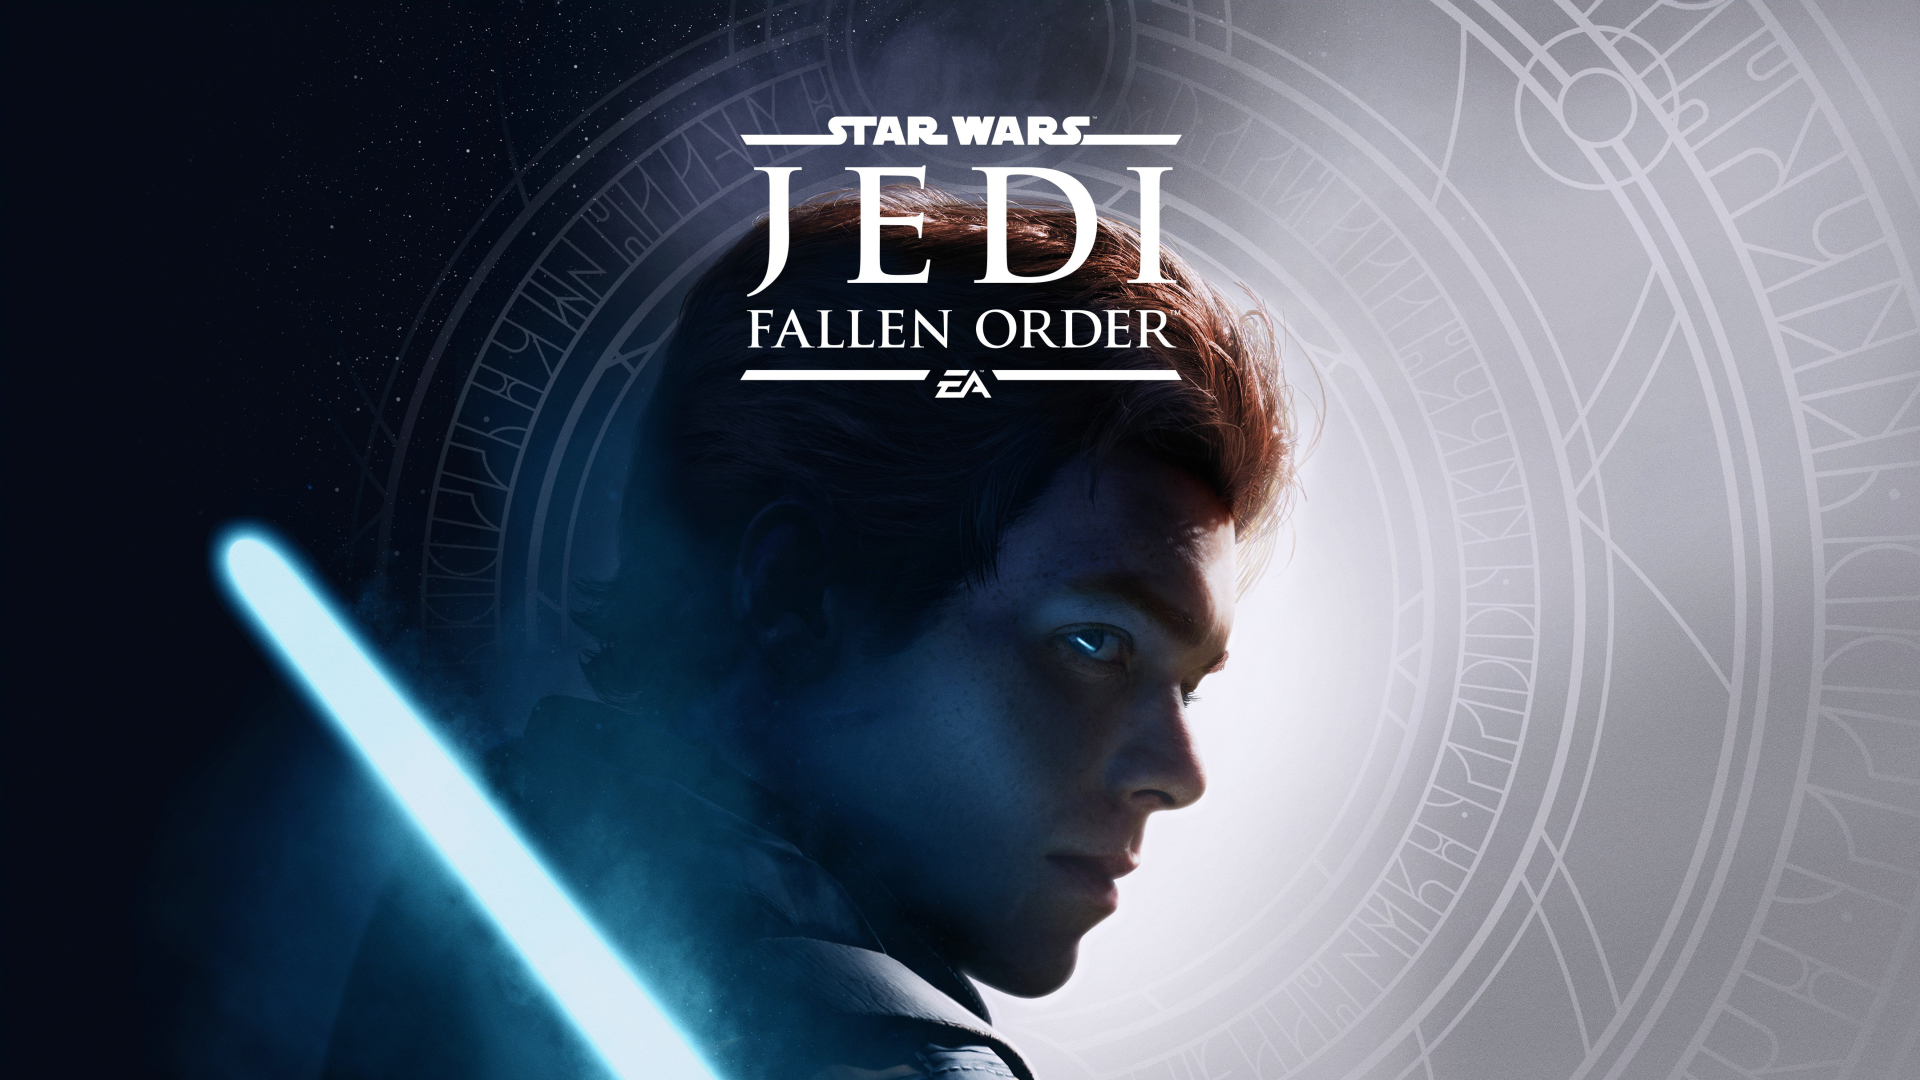 Star Wars Jedi: Fallen Order - Delivers a lot, but could deliver much more | Review